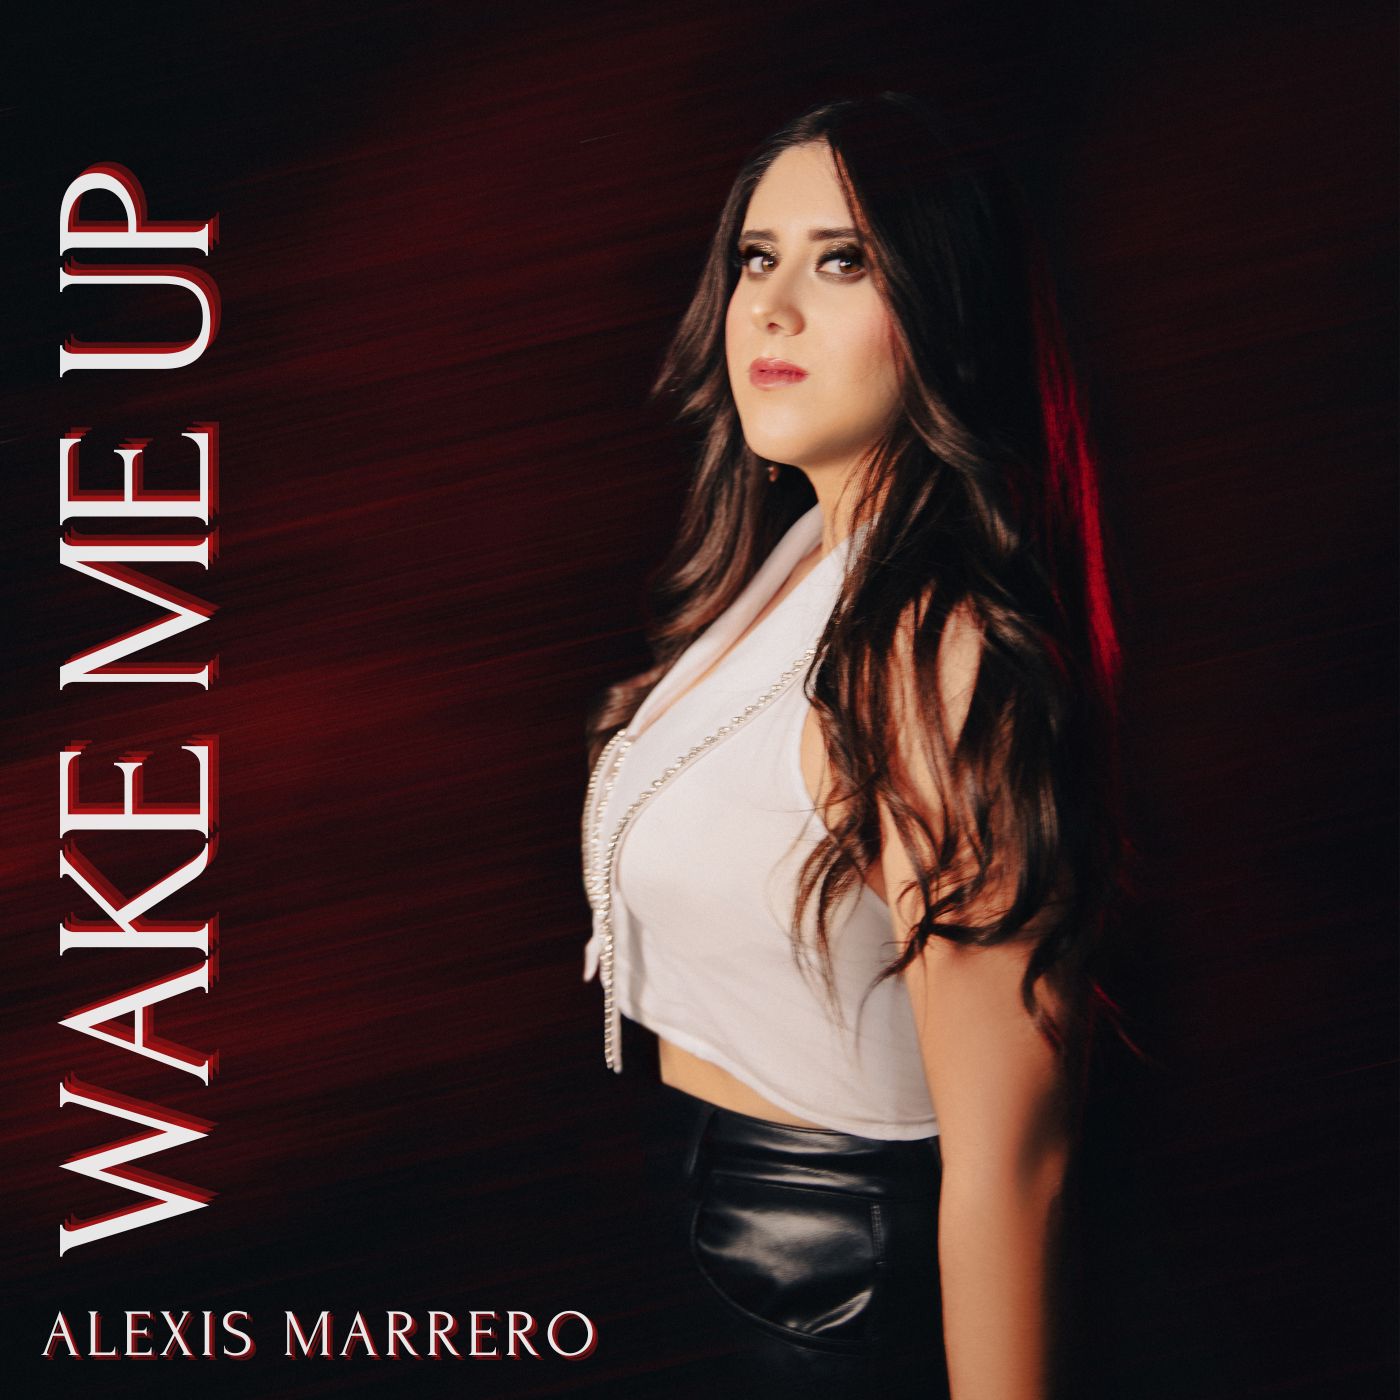 Alexis Marrero To Release Highly Anticipated New Single "Wake Me Up" On Friday, March 10th, 2023 